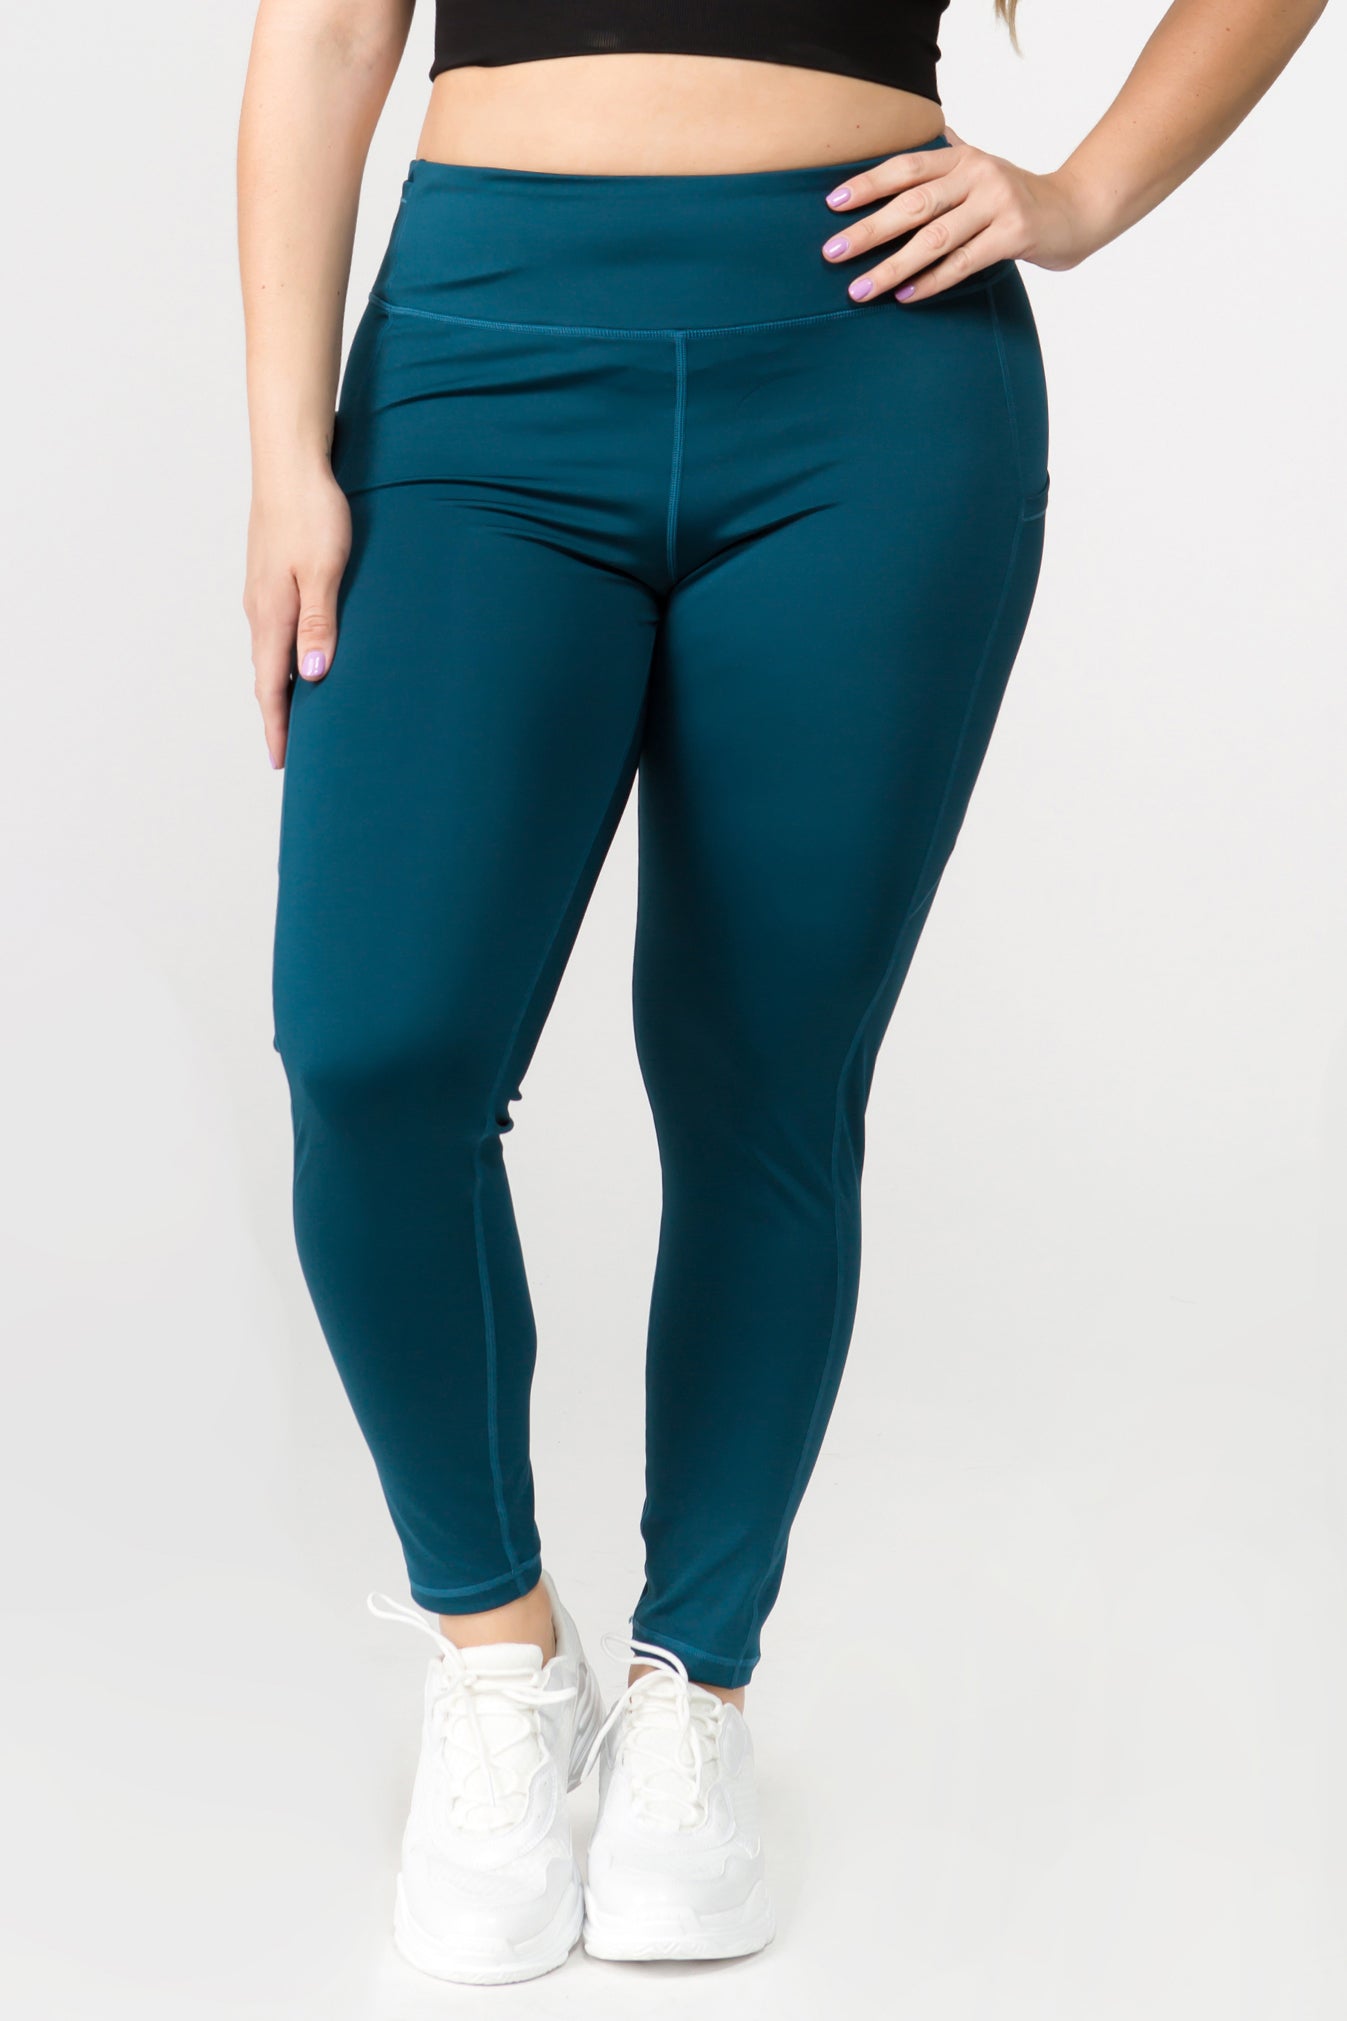 High Waisted Plus Size Gym Tights Black with Teal Shapes Accents